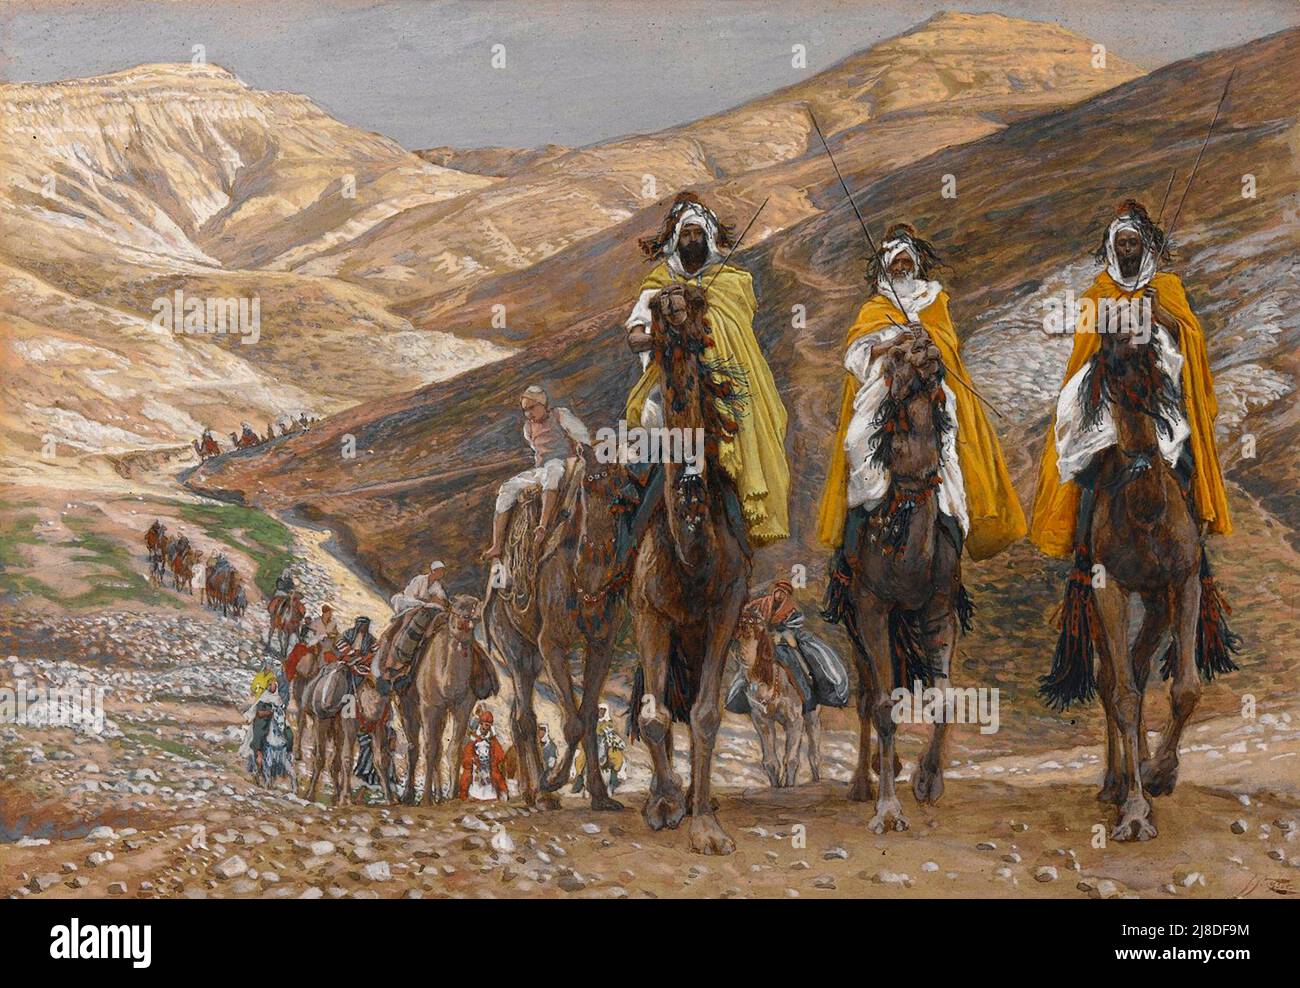 The Magi Journeying - The Three Wise Men of christian legend journeying in the desert to go and see Jesus. Painted by James Tissot. Stock Photo